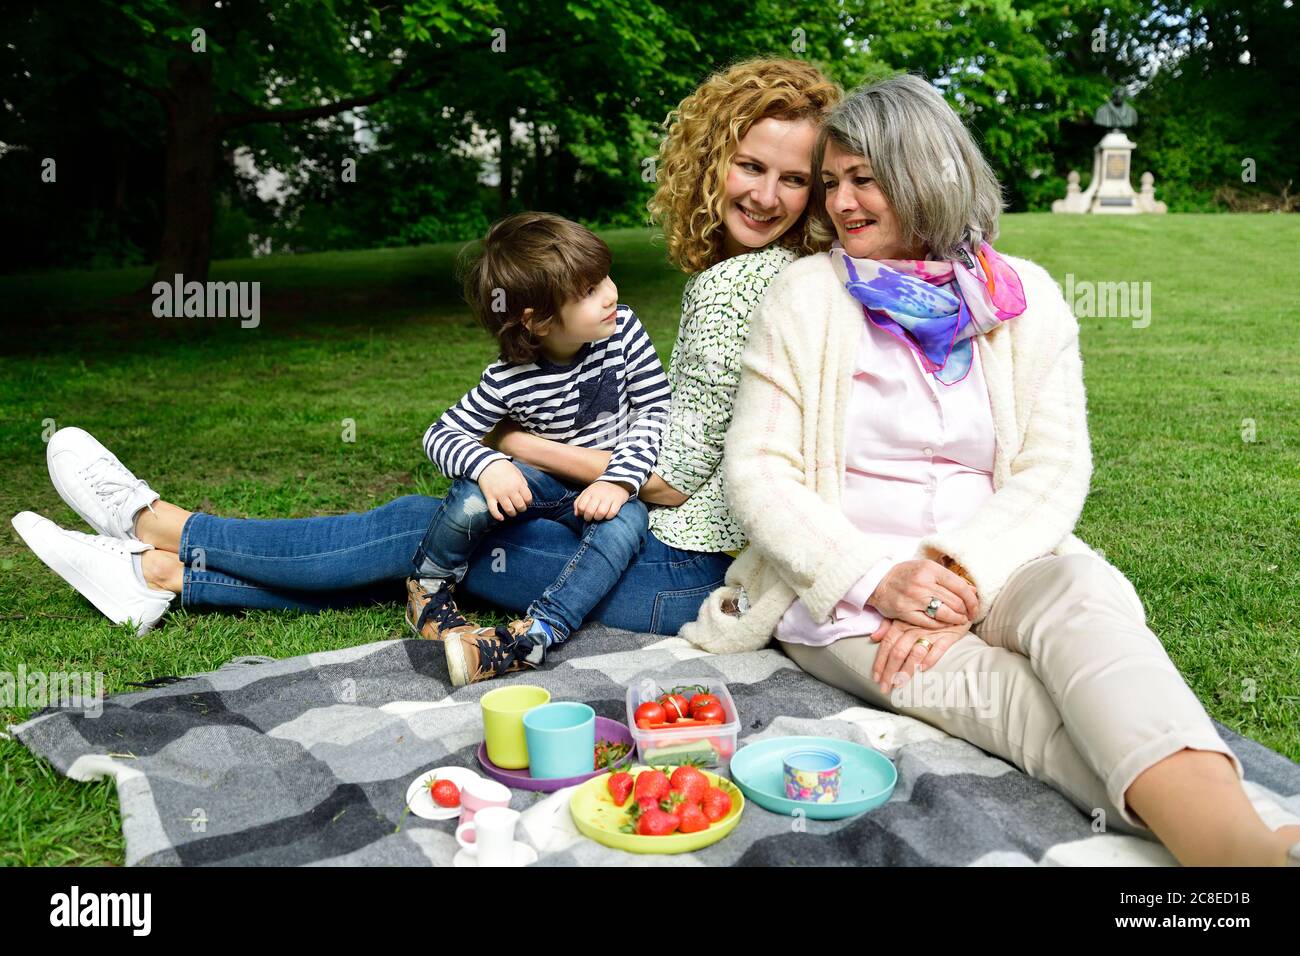 Happy boy enjoying picnic with mother and grandmother at public park Stock Photo